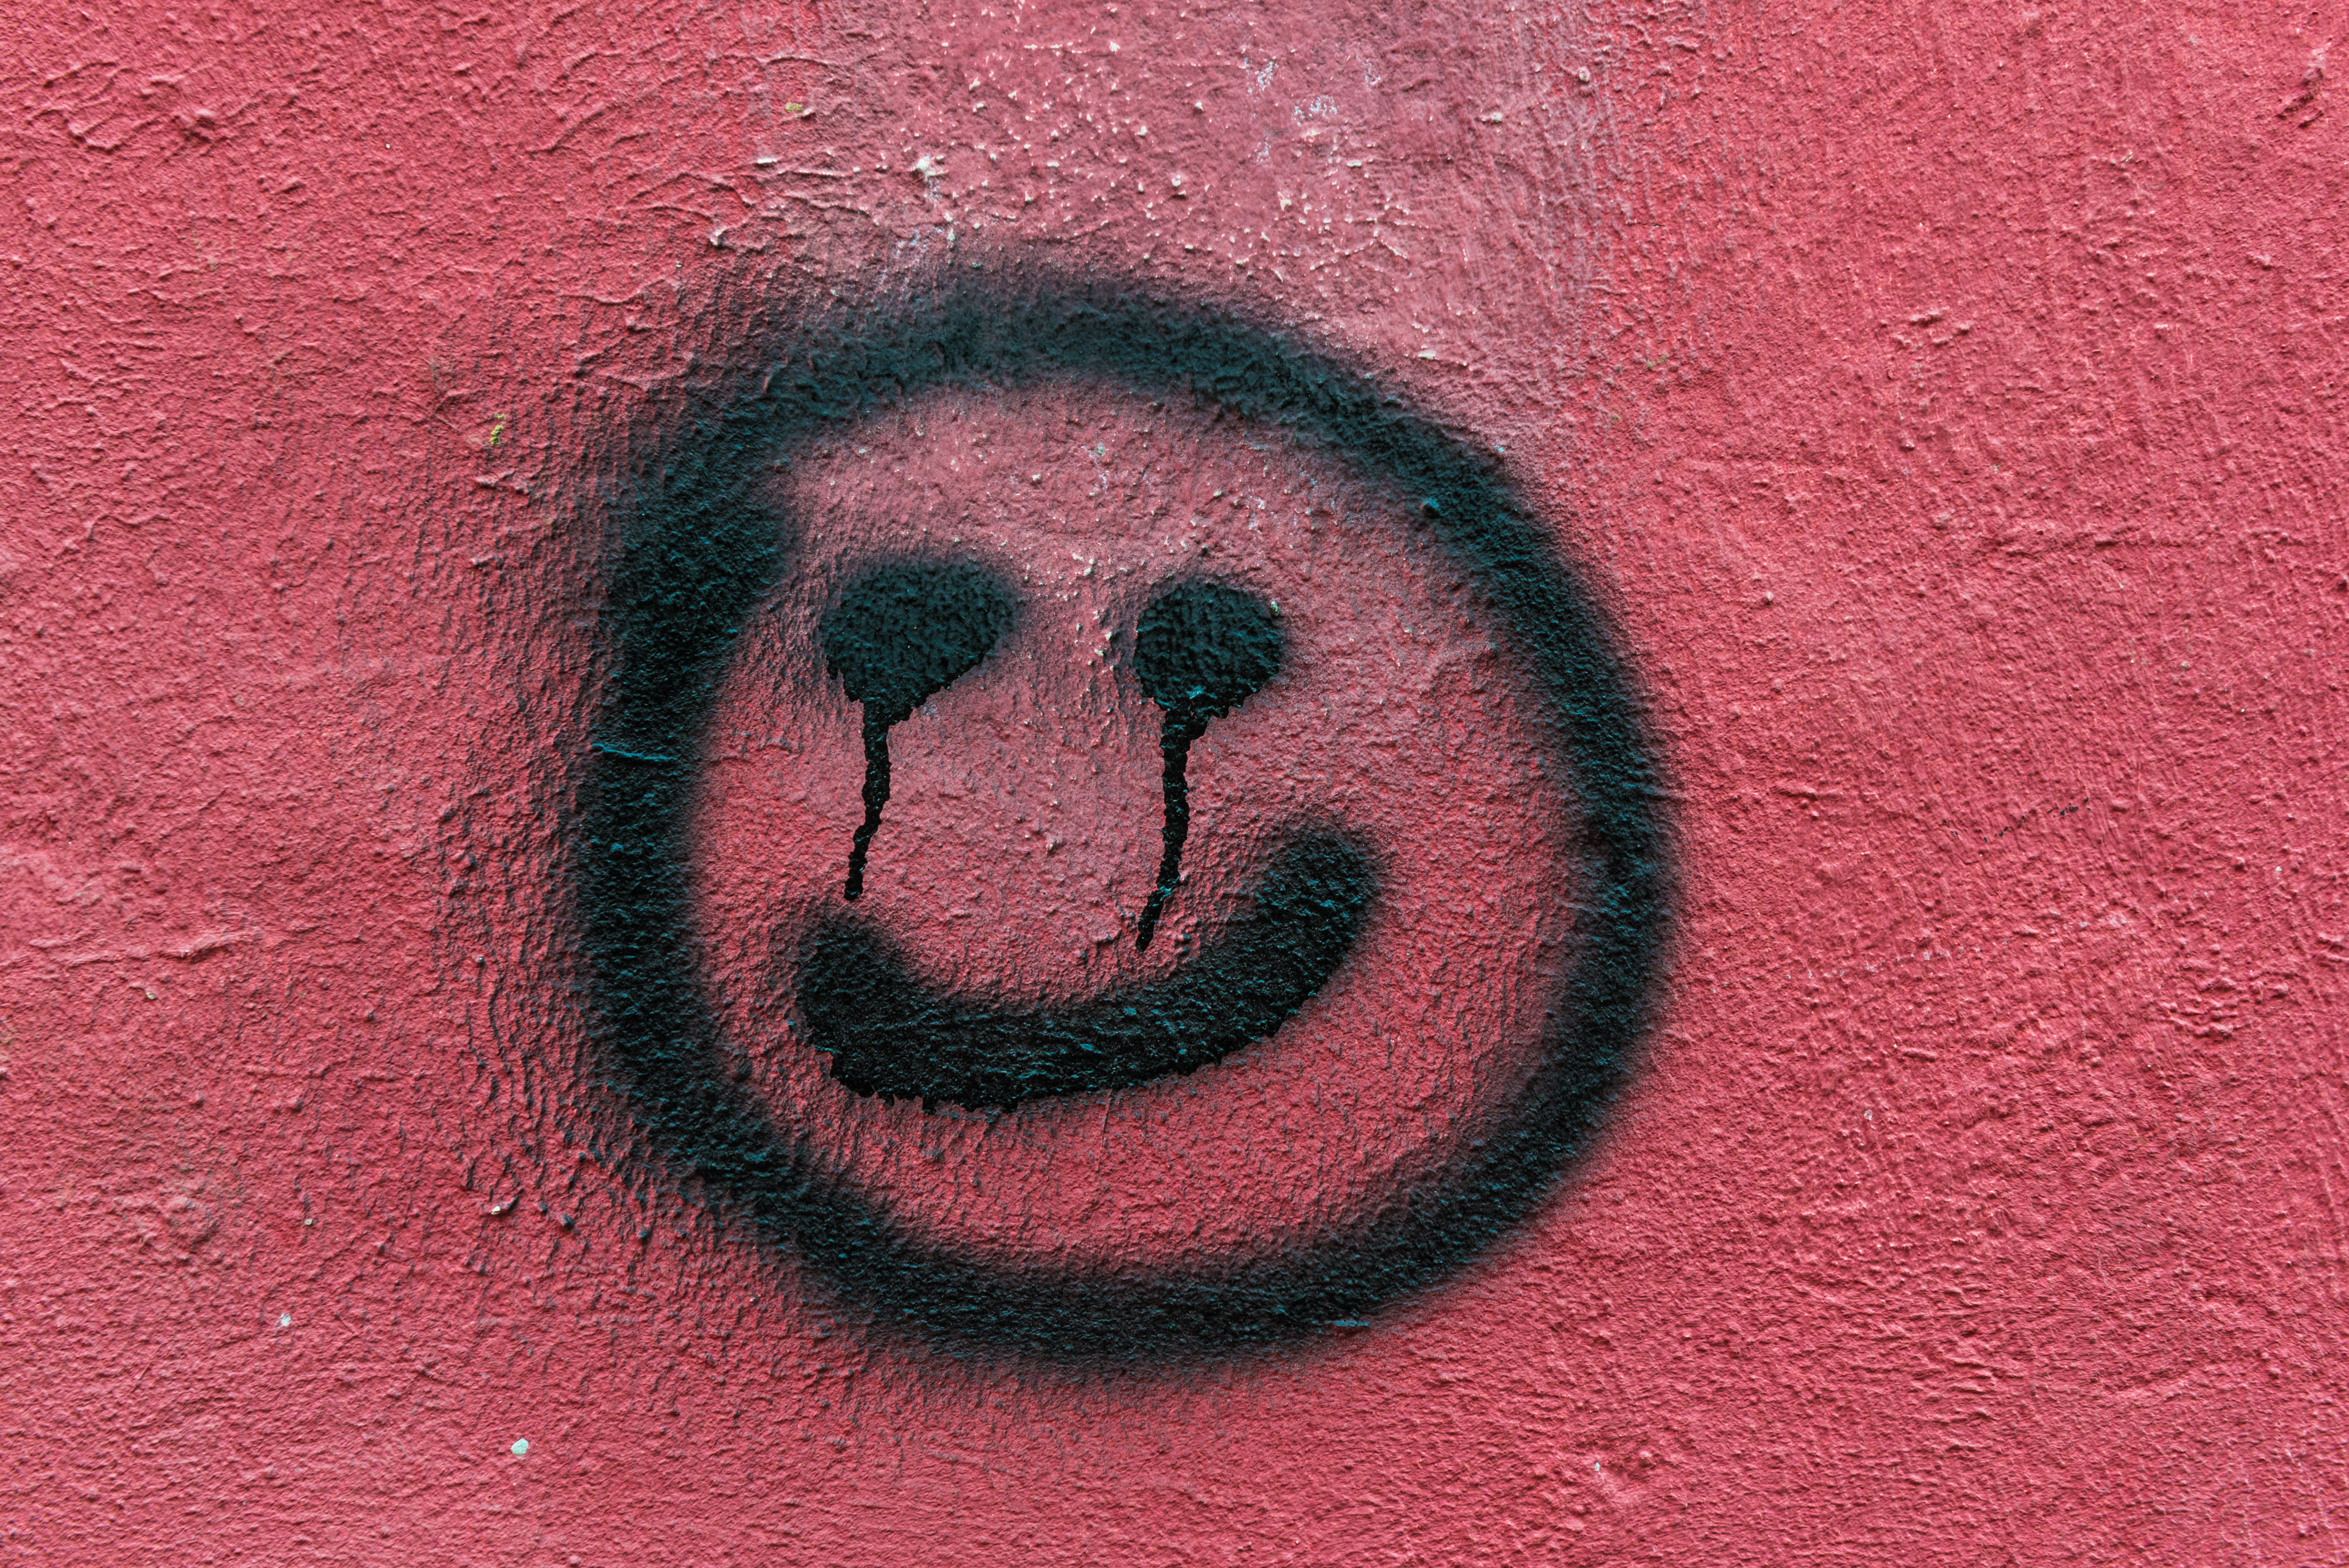 Smiley Face graffiti, like the ones found near where police say Dakota James plunged into the Ohio River. (Shutterstock/ gabriel12)